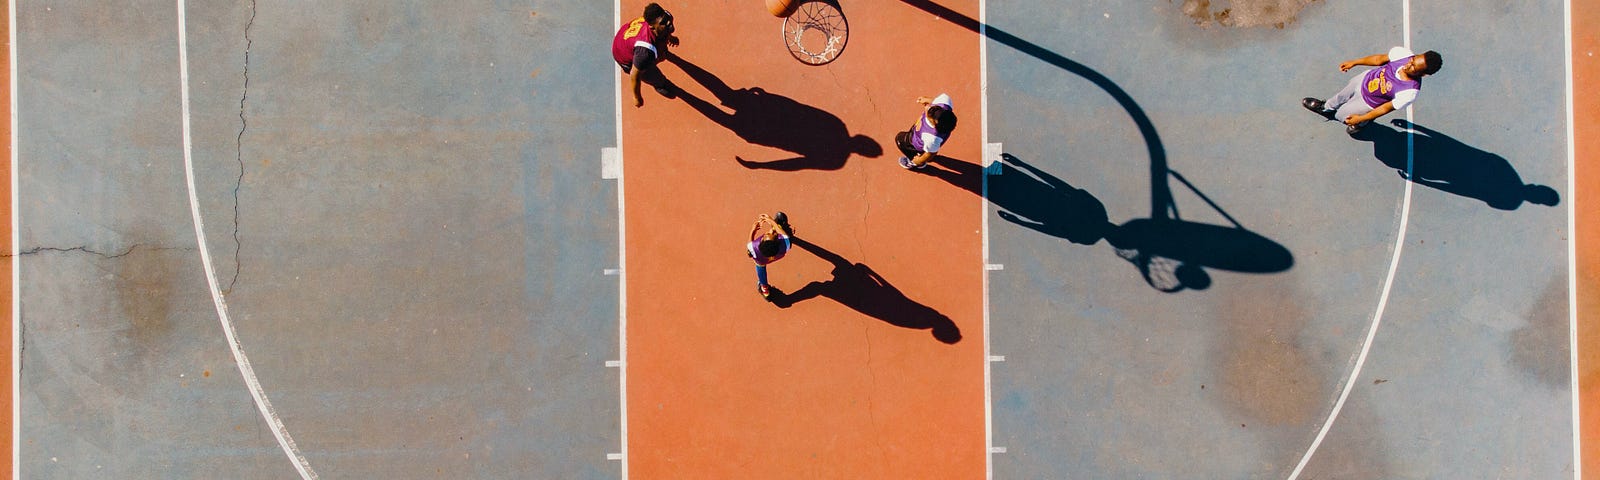 Top-down view of a basketball court with people playing.